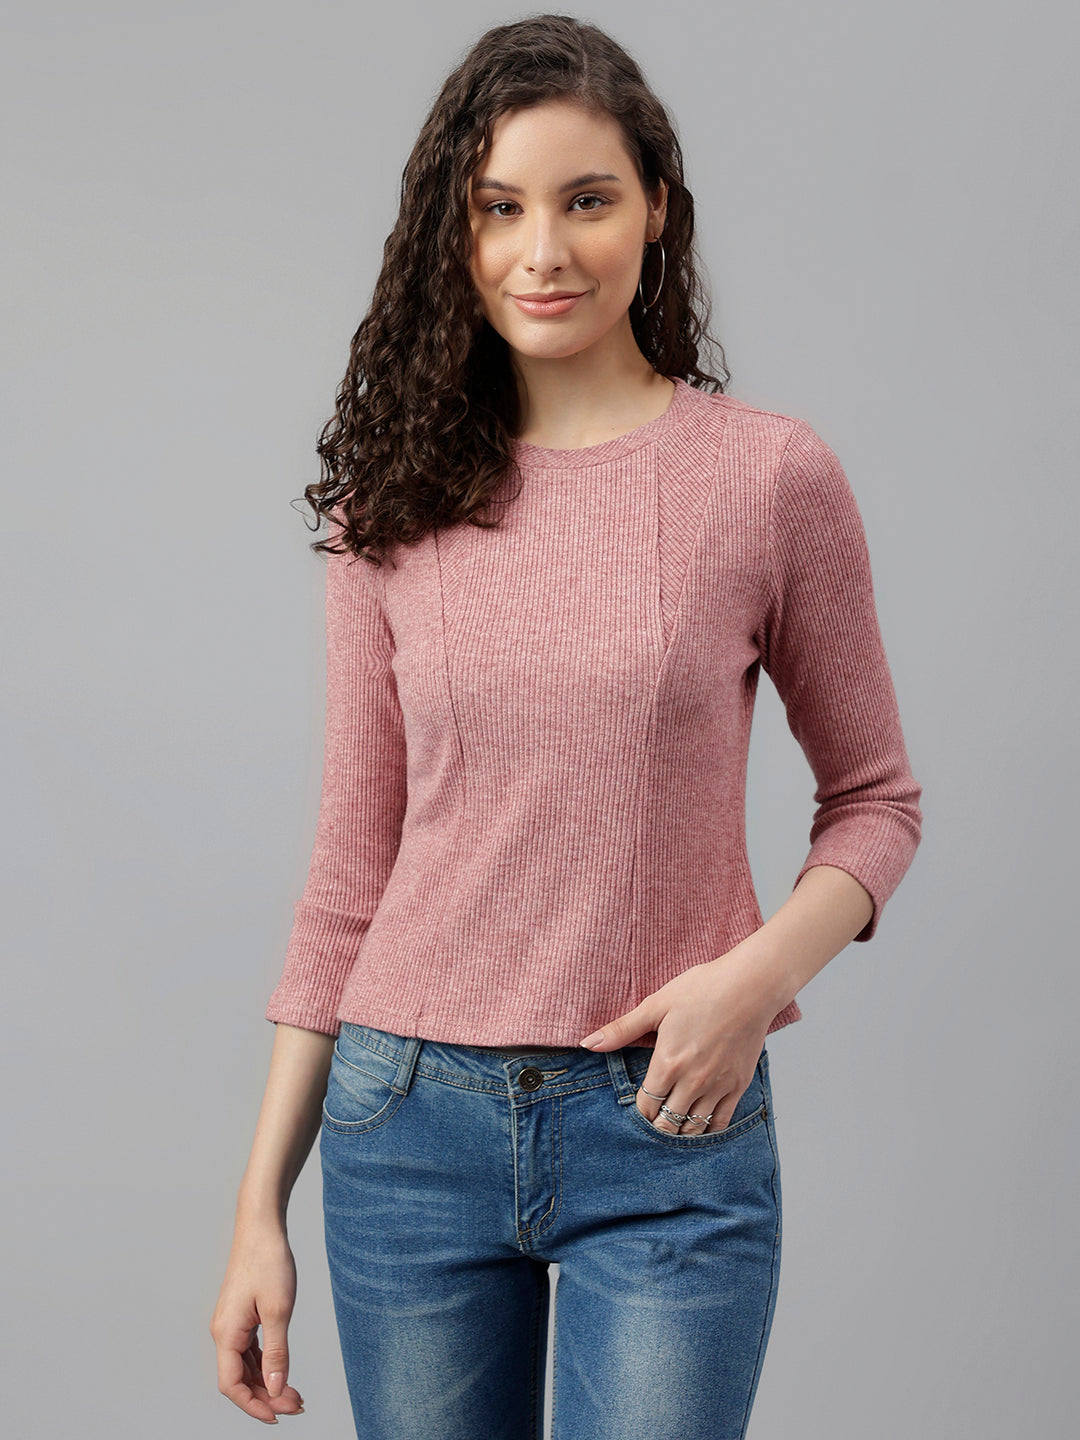 Maroon Full Sleeve Solid Knit Top